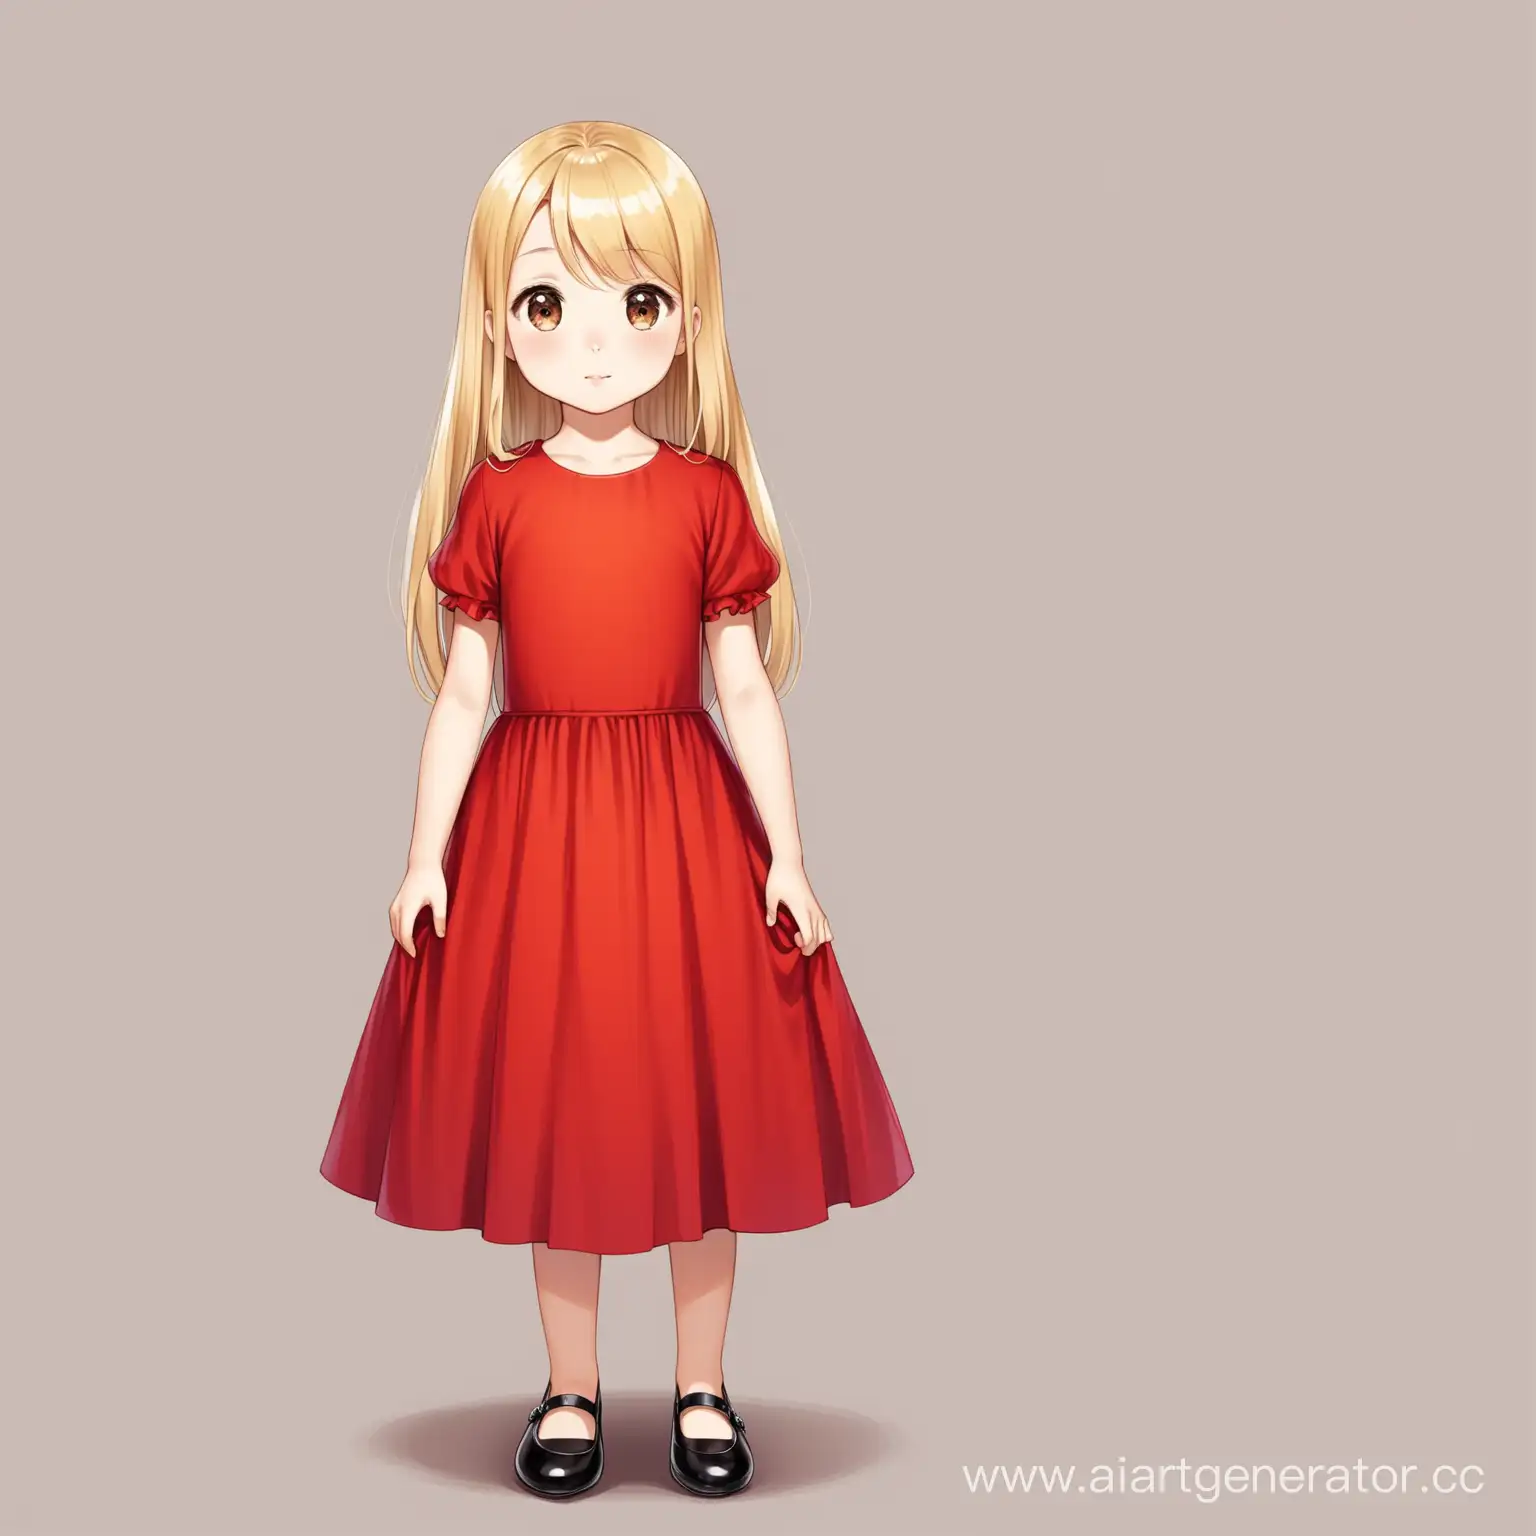 Adorable-9YearOld-Girl-in-Red-Dress-with-Big-Brown-Eyes-and-Straight-Blond-Hair